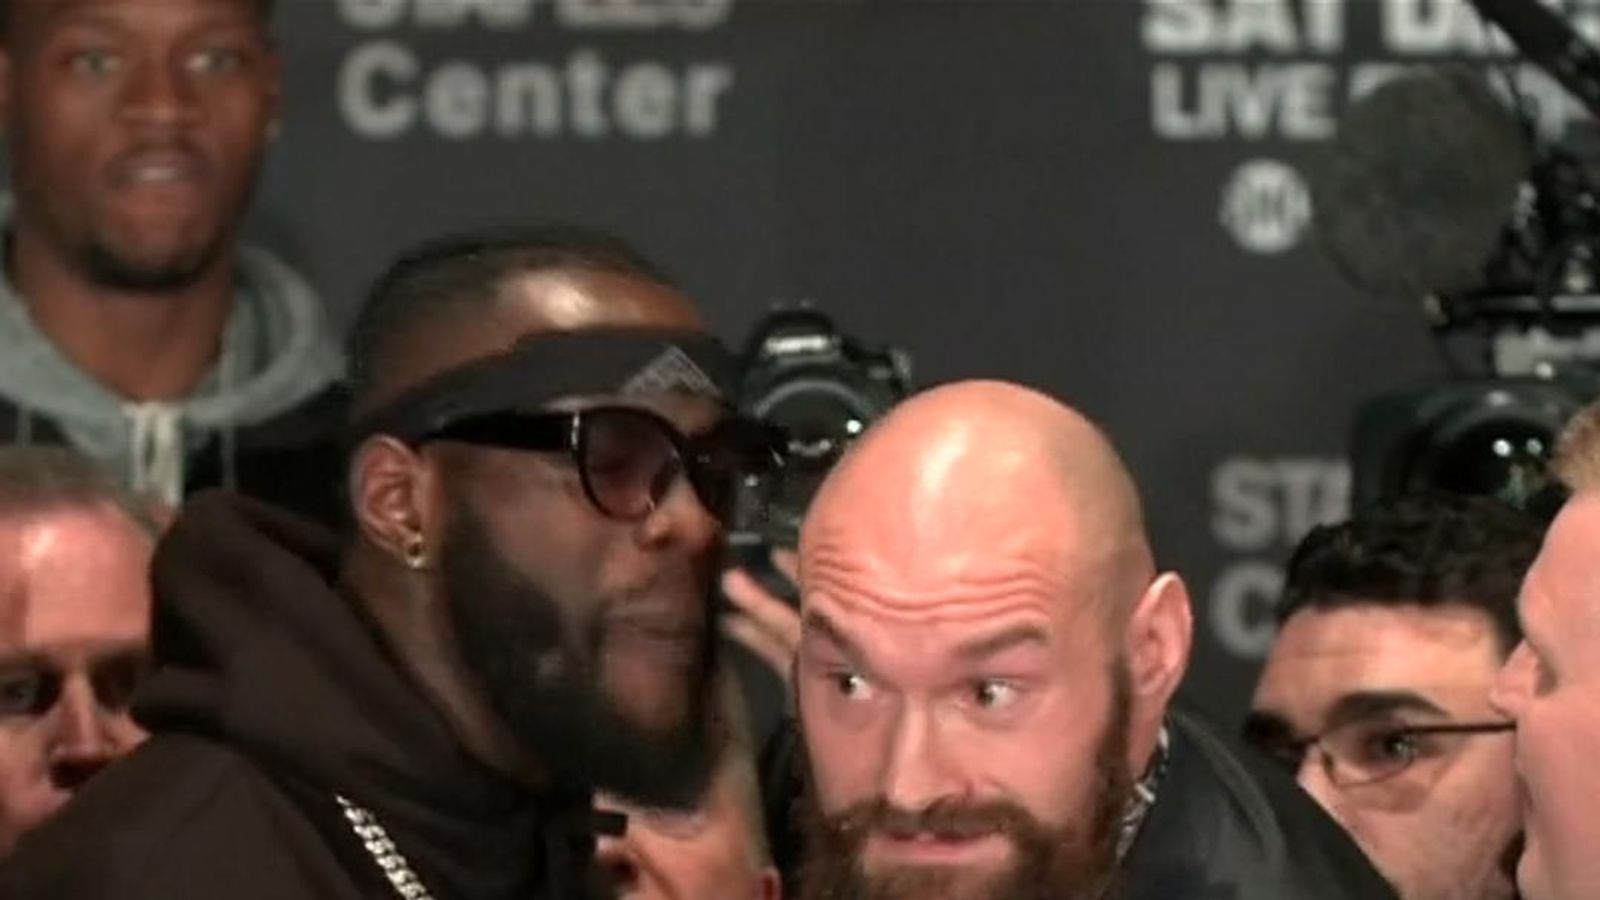 Wilder vs Fury: Follow all the action and reaction from the fight | World News | Sky News